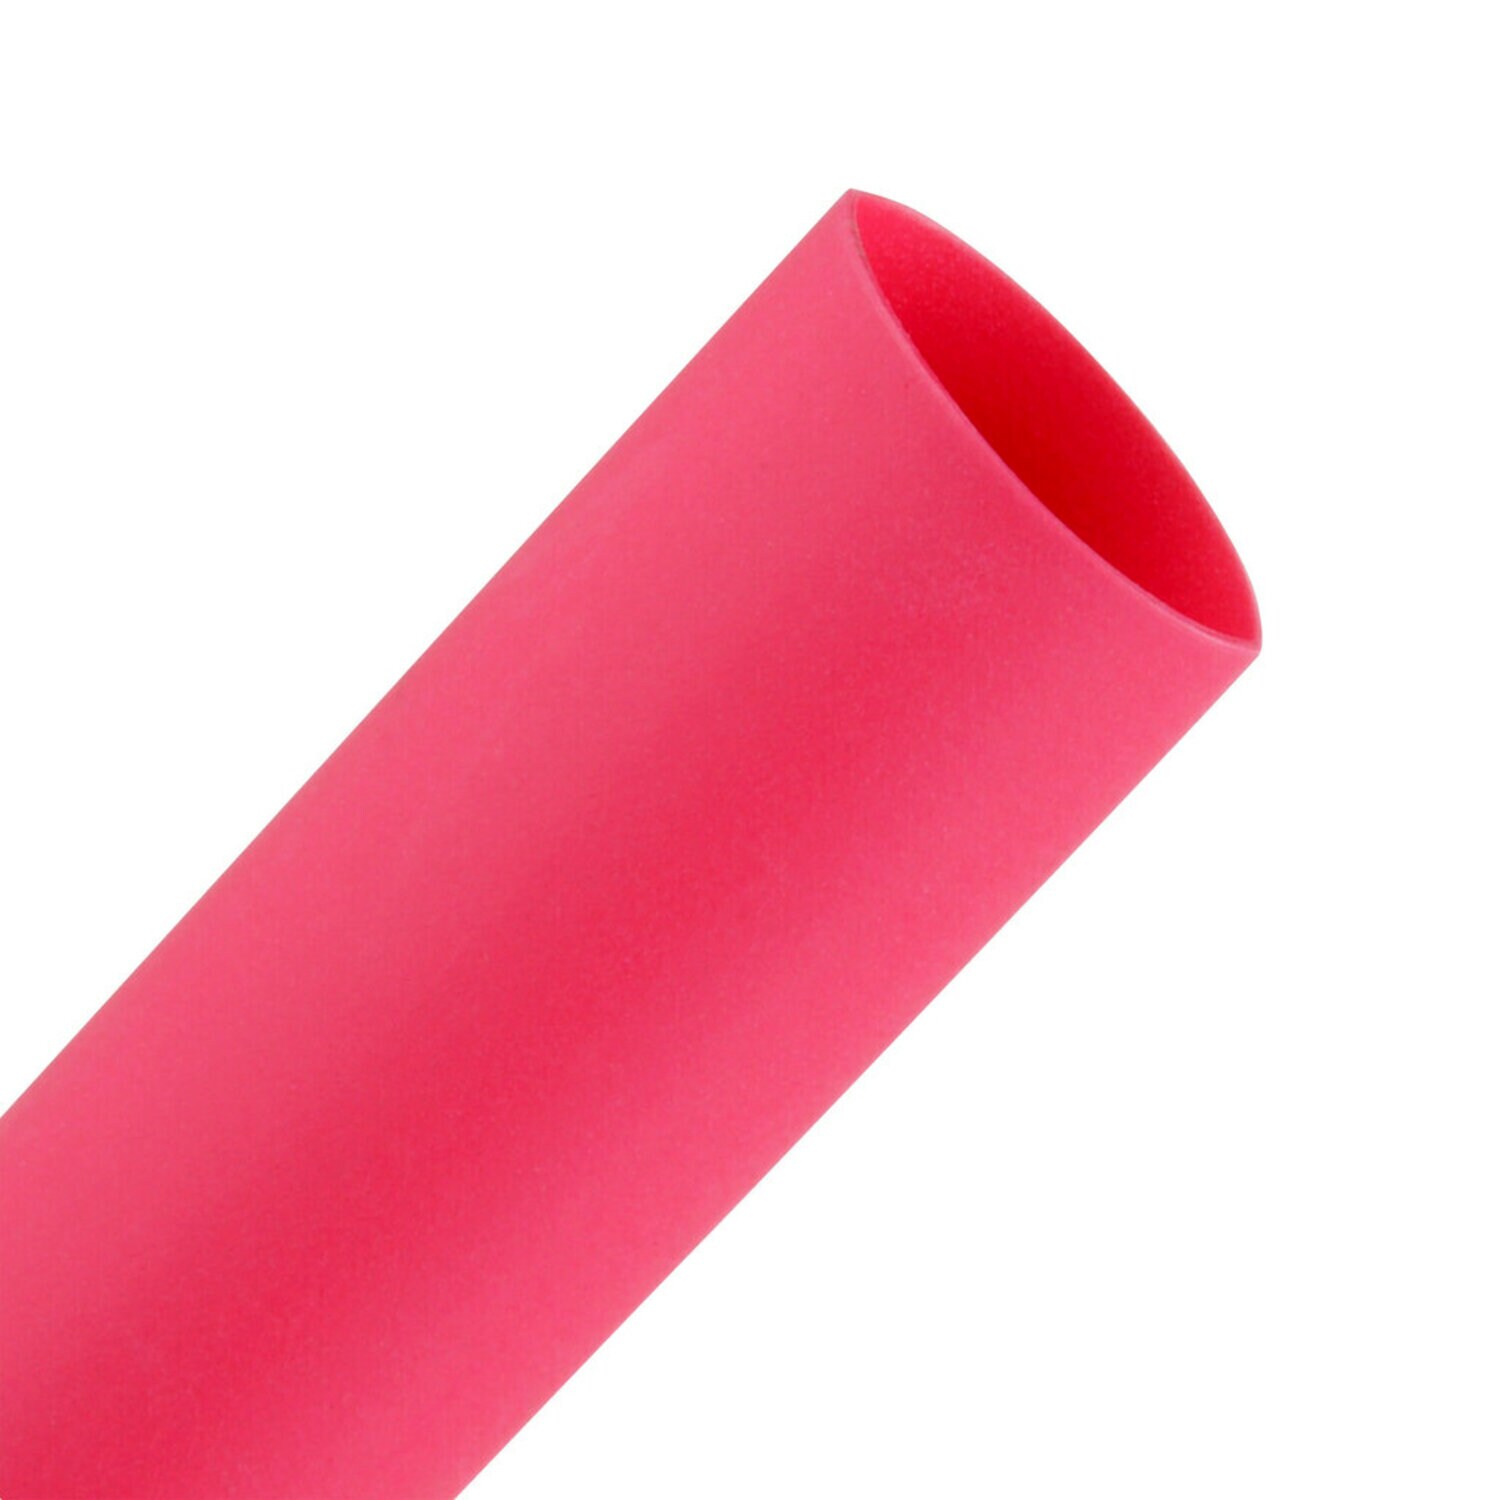 7100020271 - 3M Heat Shrink Thin-Wall Tubing FP-301-3/8-Red-200`: 200 ft spool
length, 600 ft/box, 3 Rolls/Case